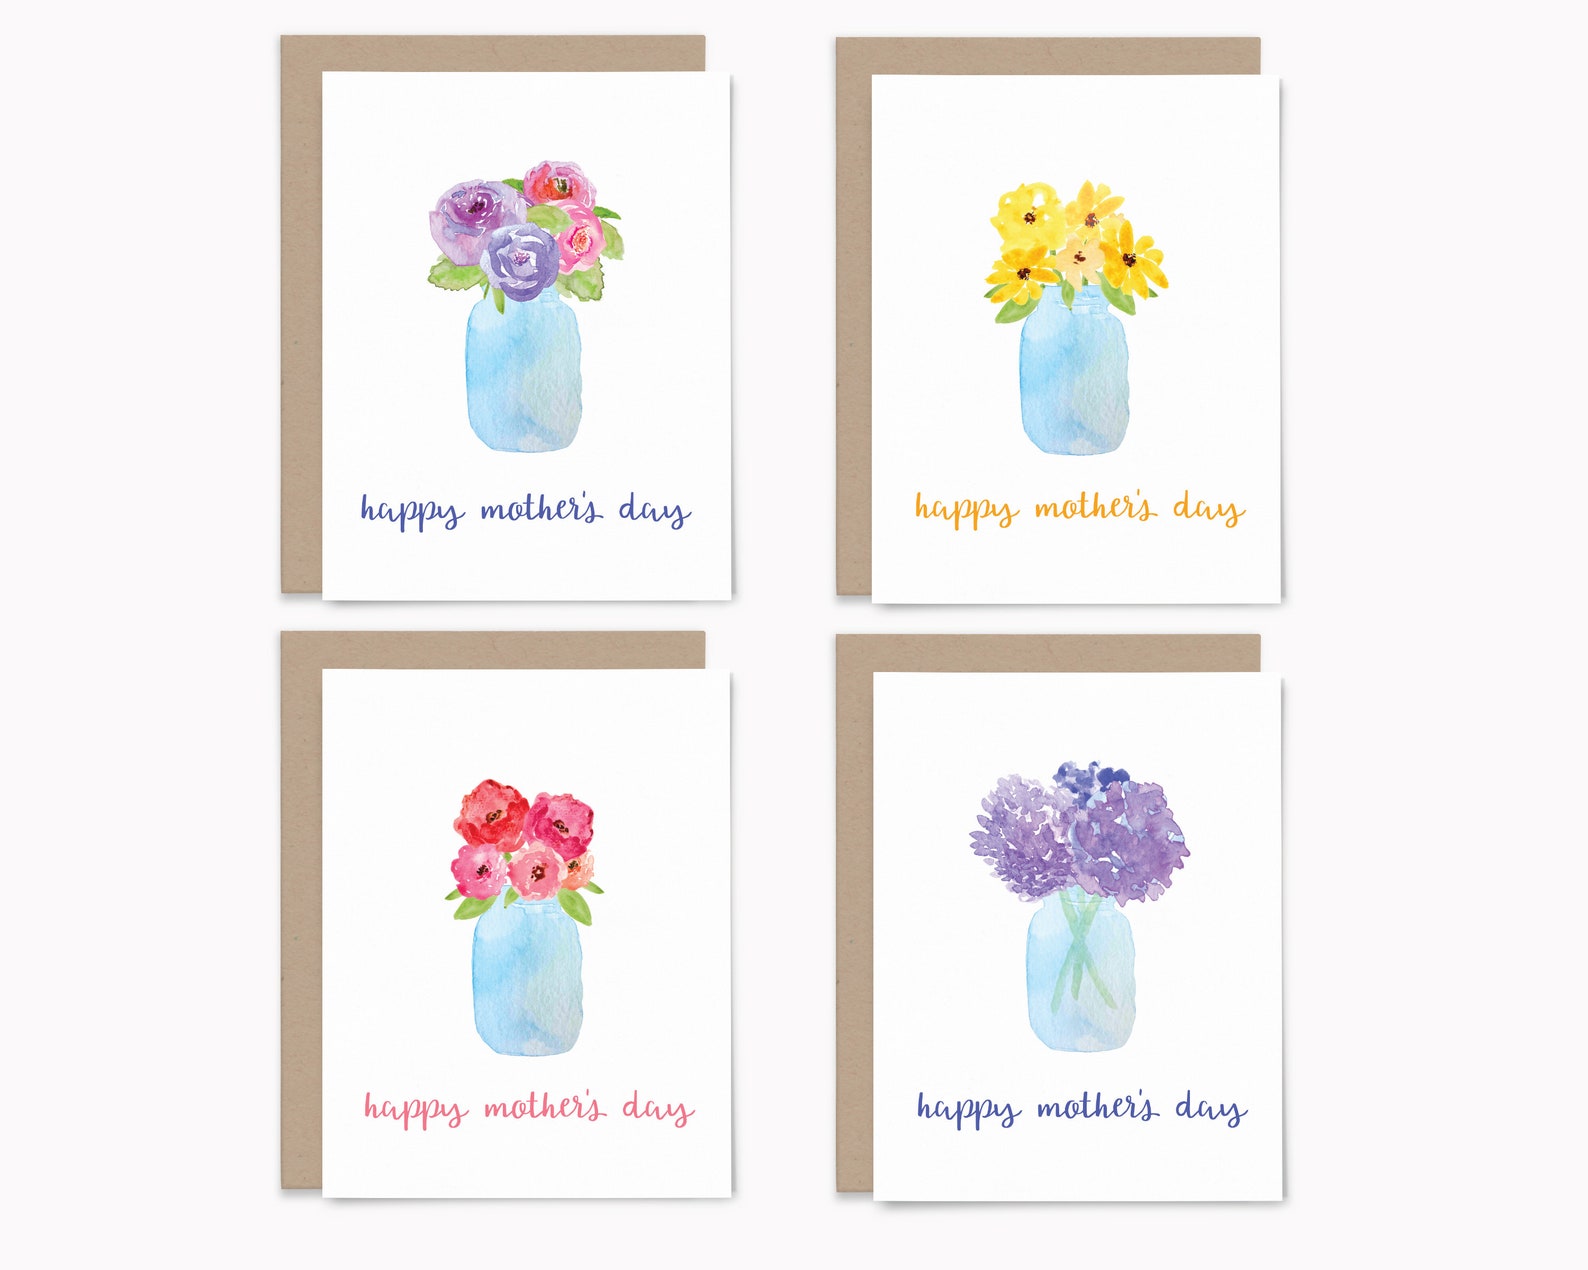 Handmade Watercolor Mother's Day Cards